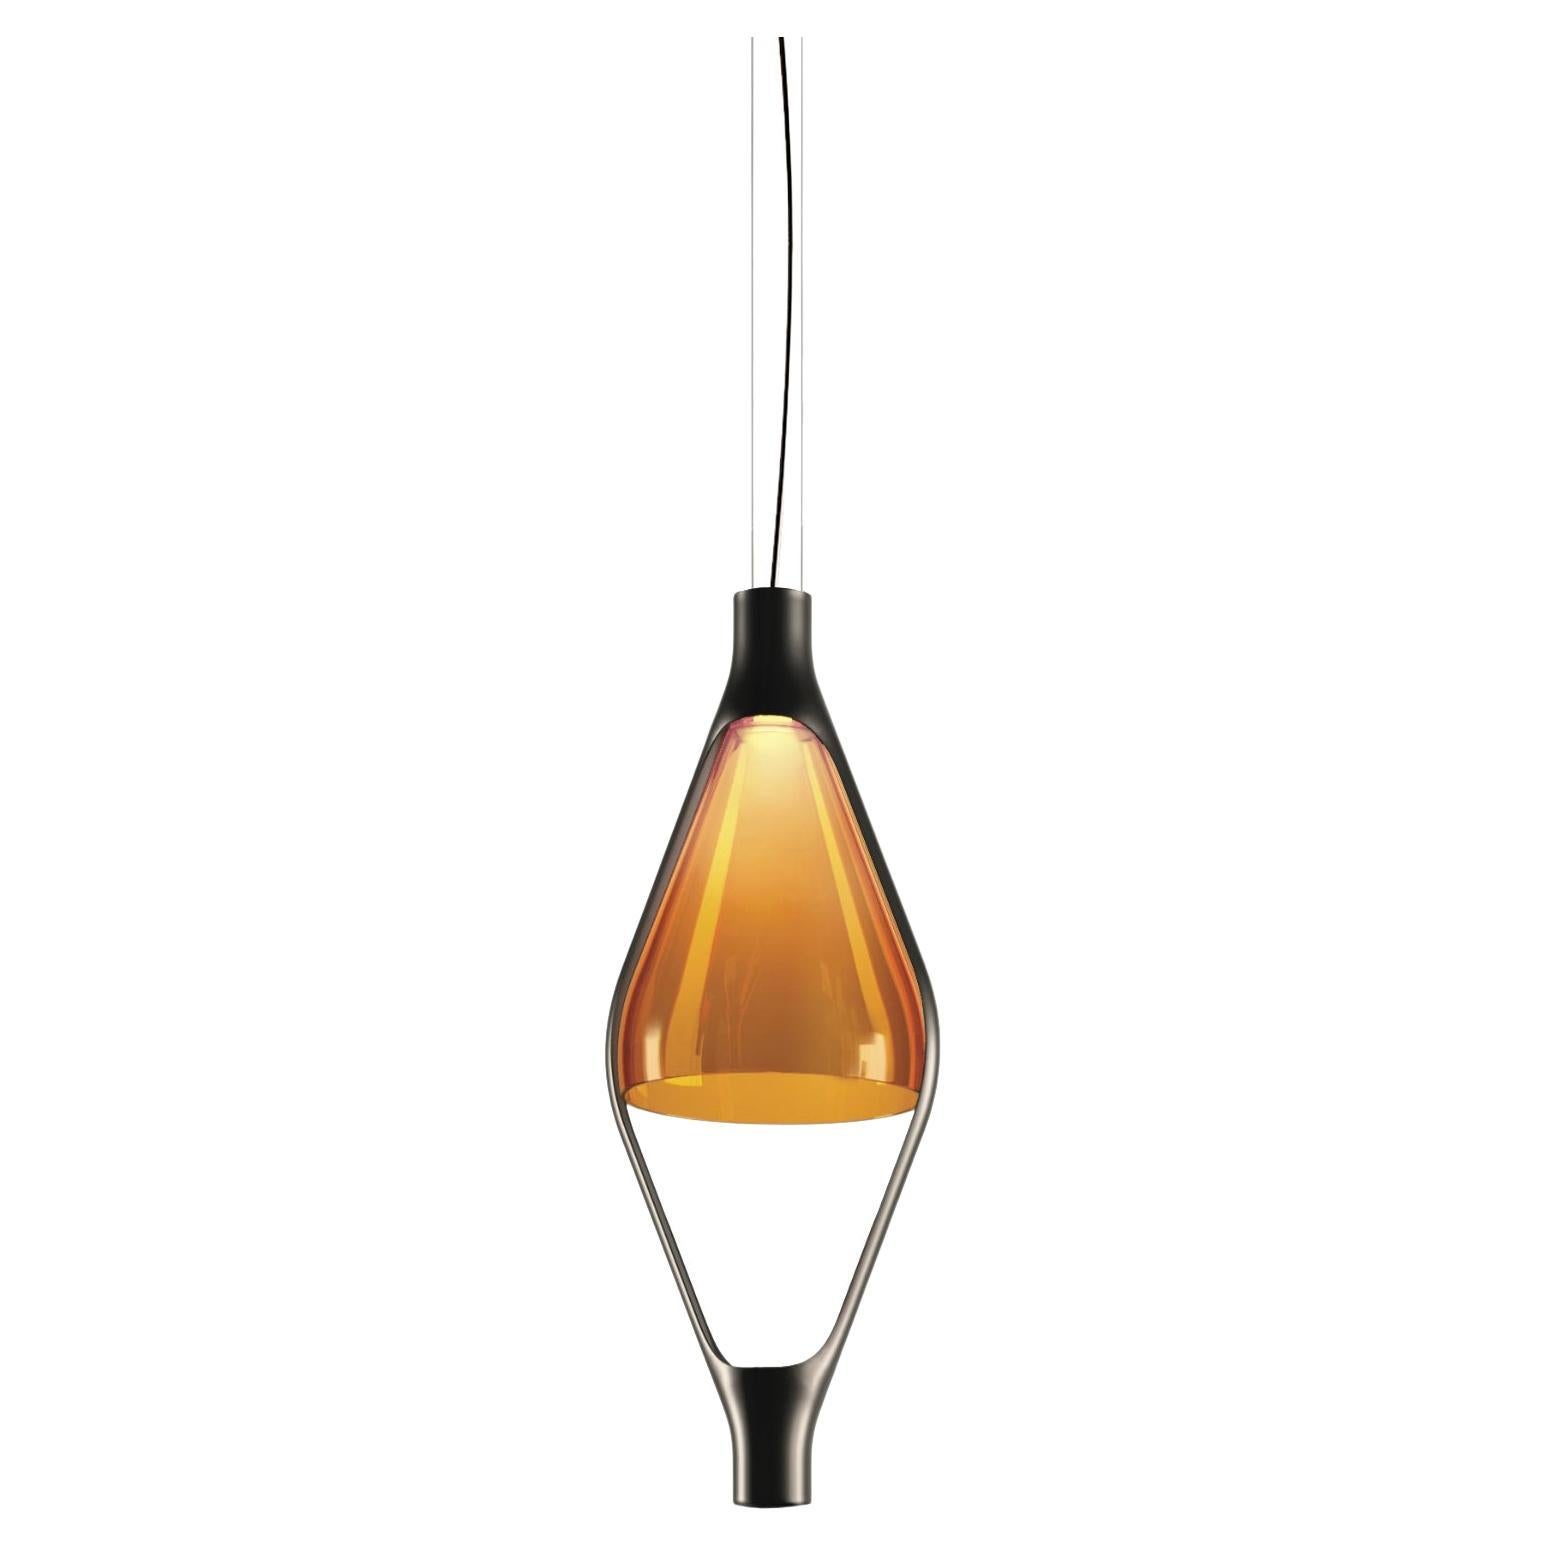 Metal 'Viceversa 2' Modular Suspension Lamp by Noé Lawrance for Kdln in Amber For Sale